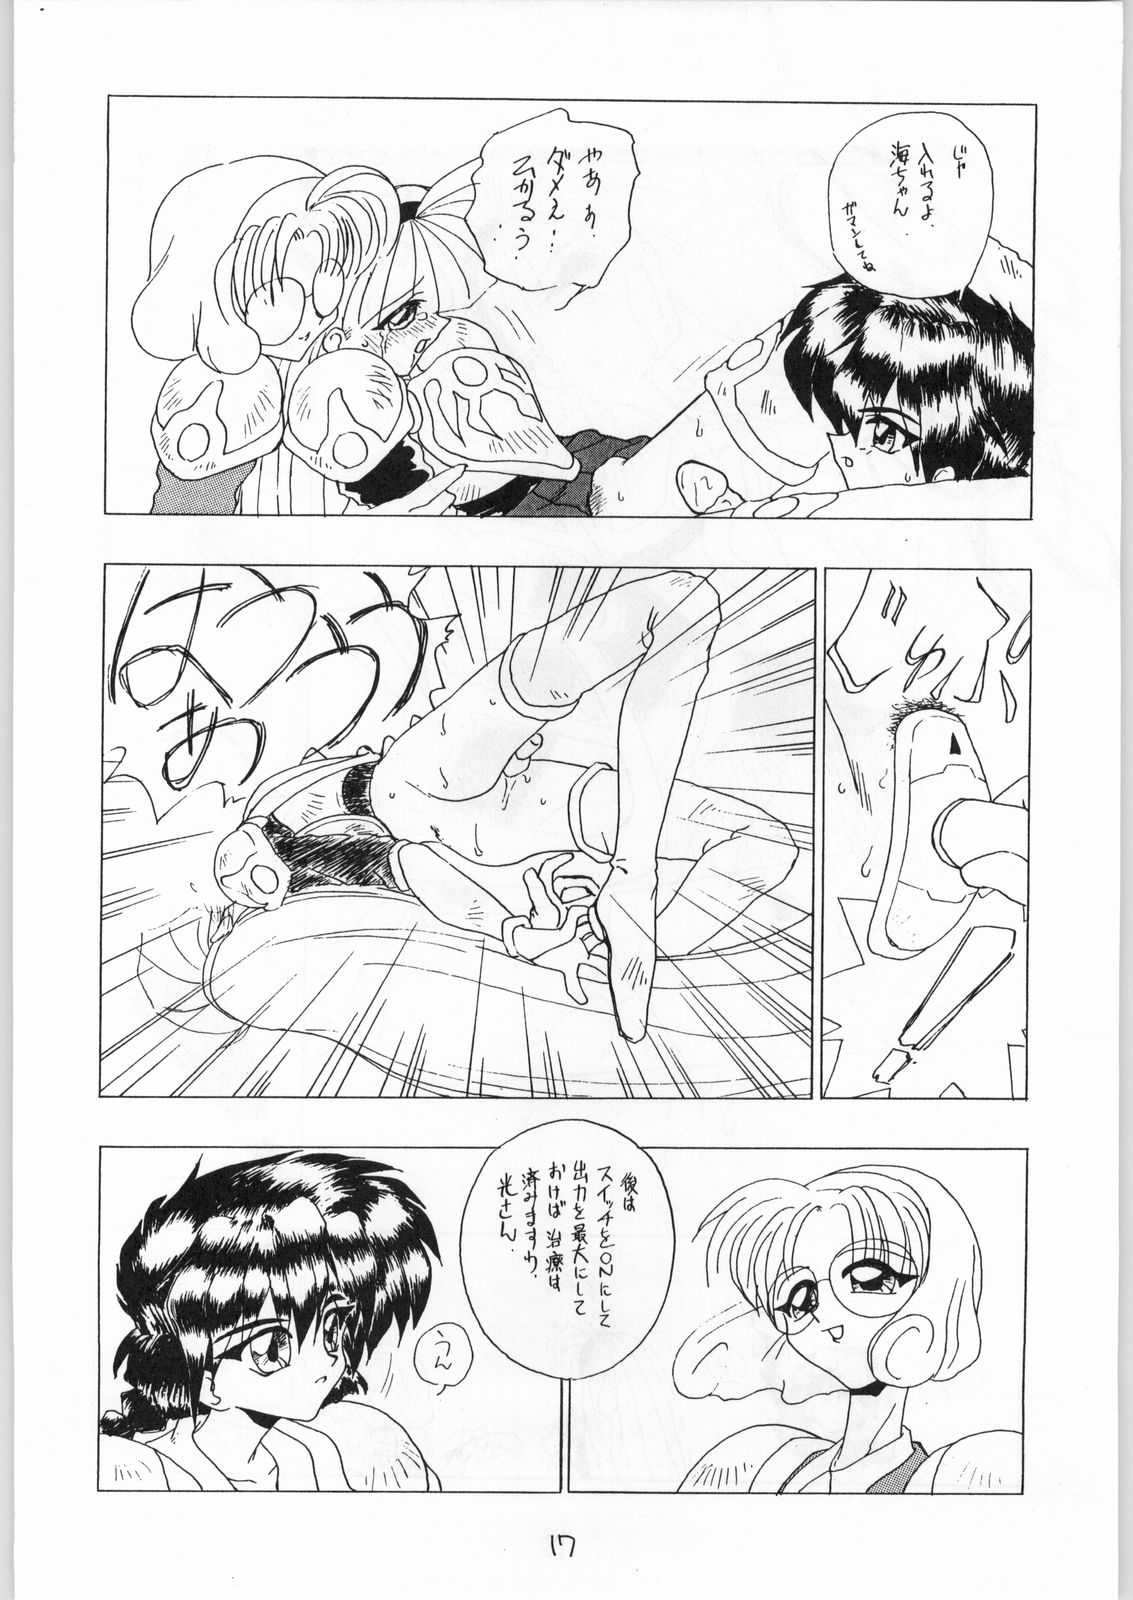 [Various] Girl in the Box 2 (Cafeteria Watermelon) page 16 full